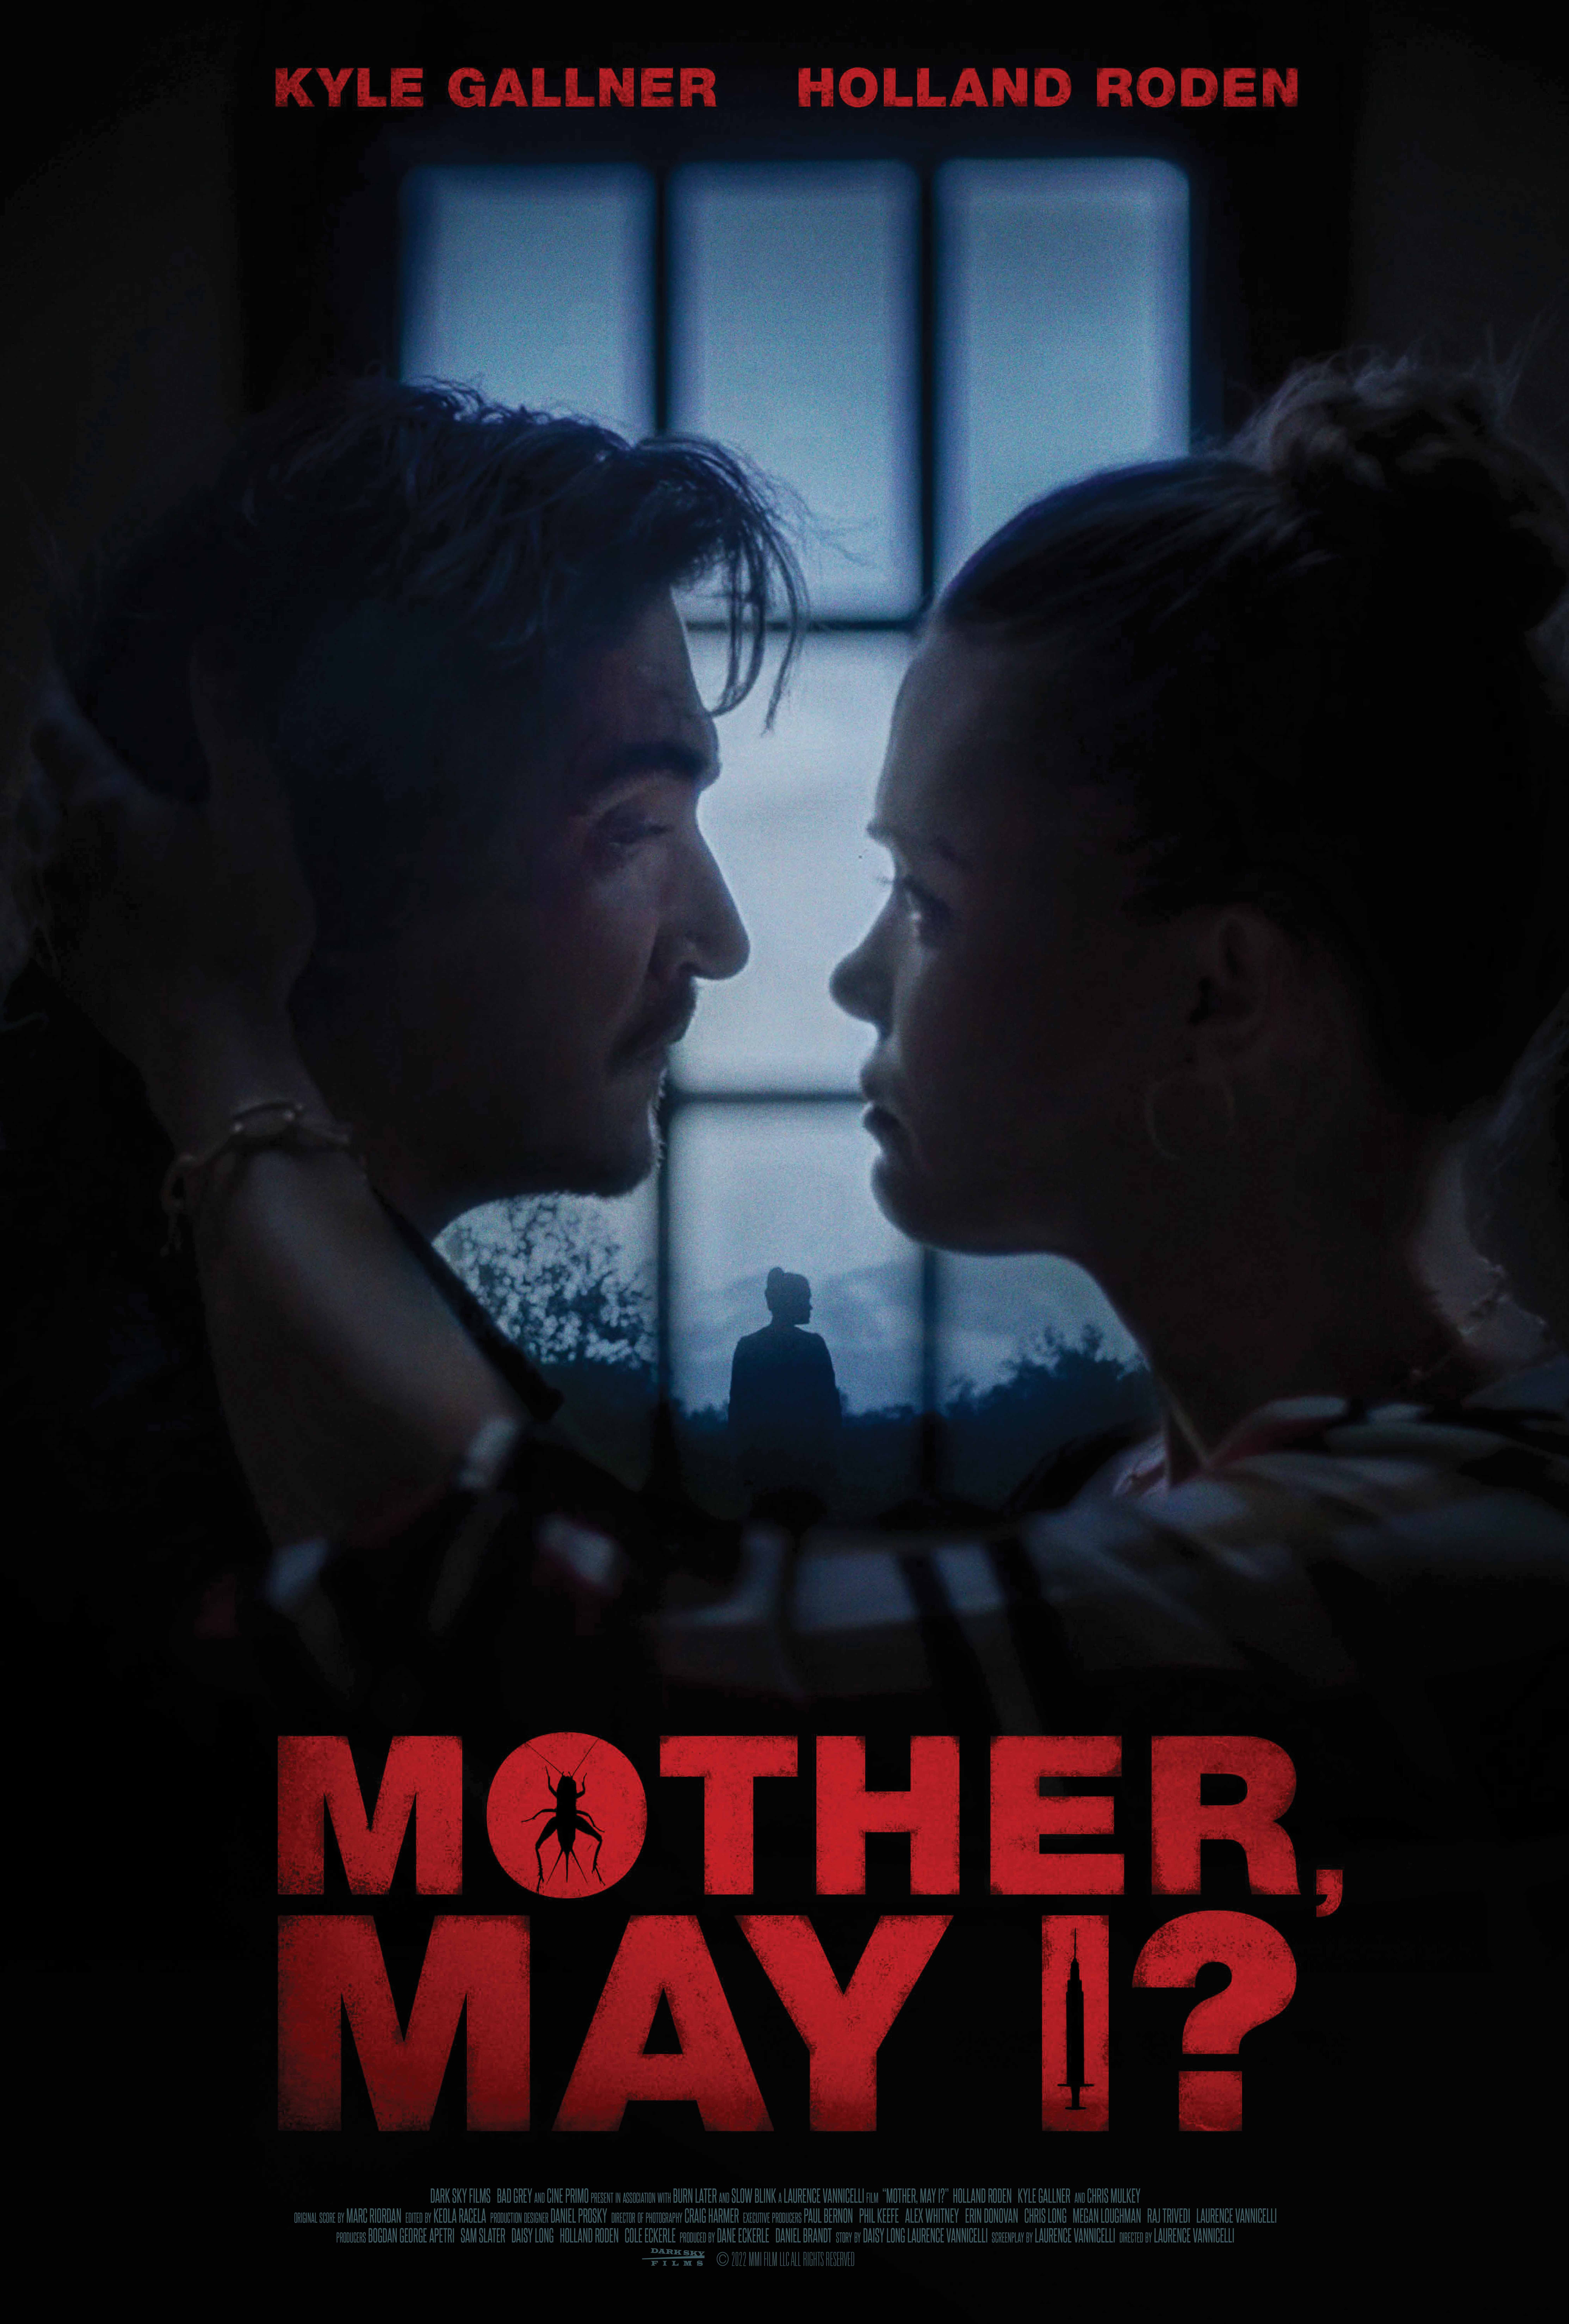 "Mother, May I?" - A Riveting Psychological Thriller Featuring Kyle Gallner and Holland Roden Set to Hit Theaters and VOD on July 21st 56